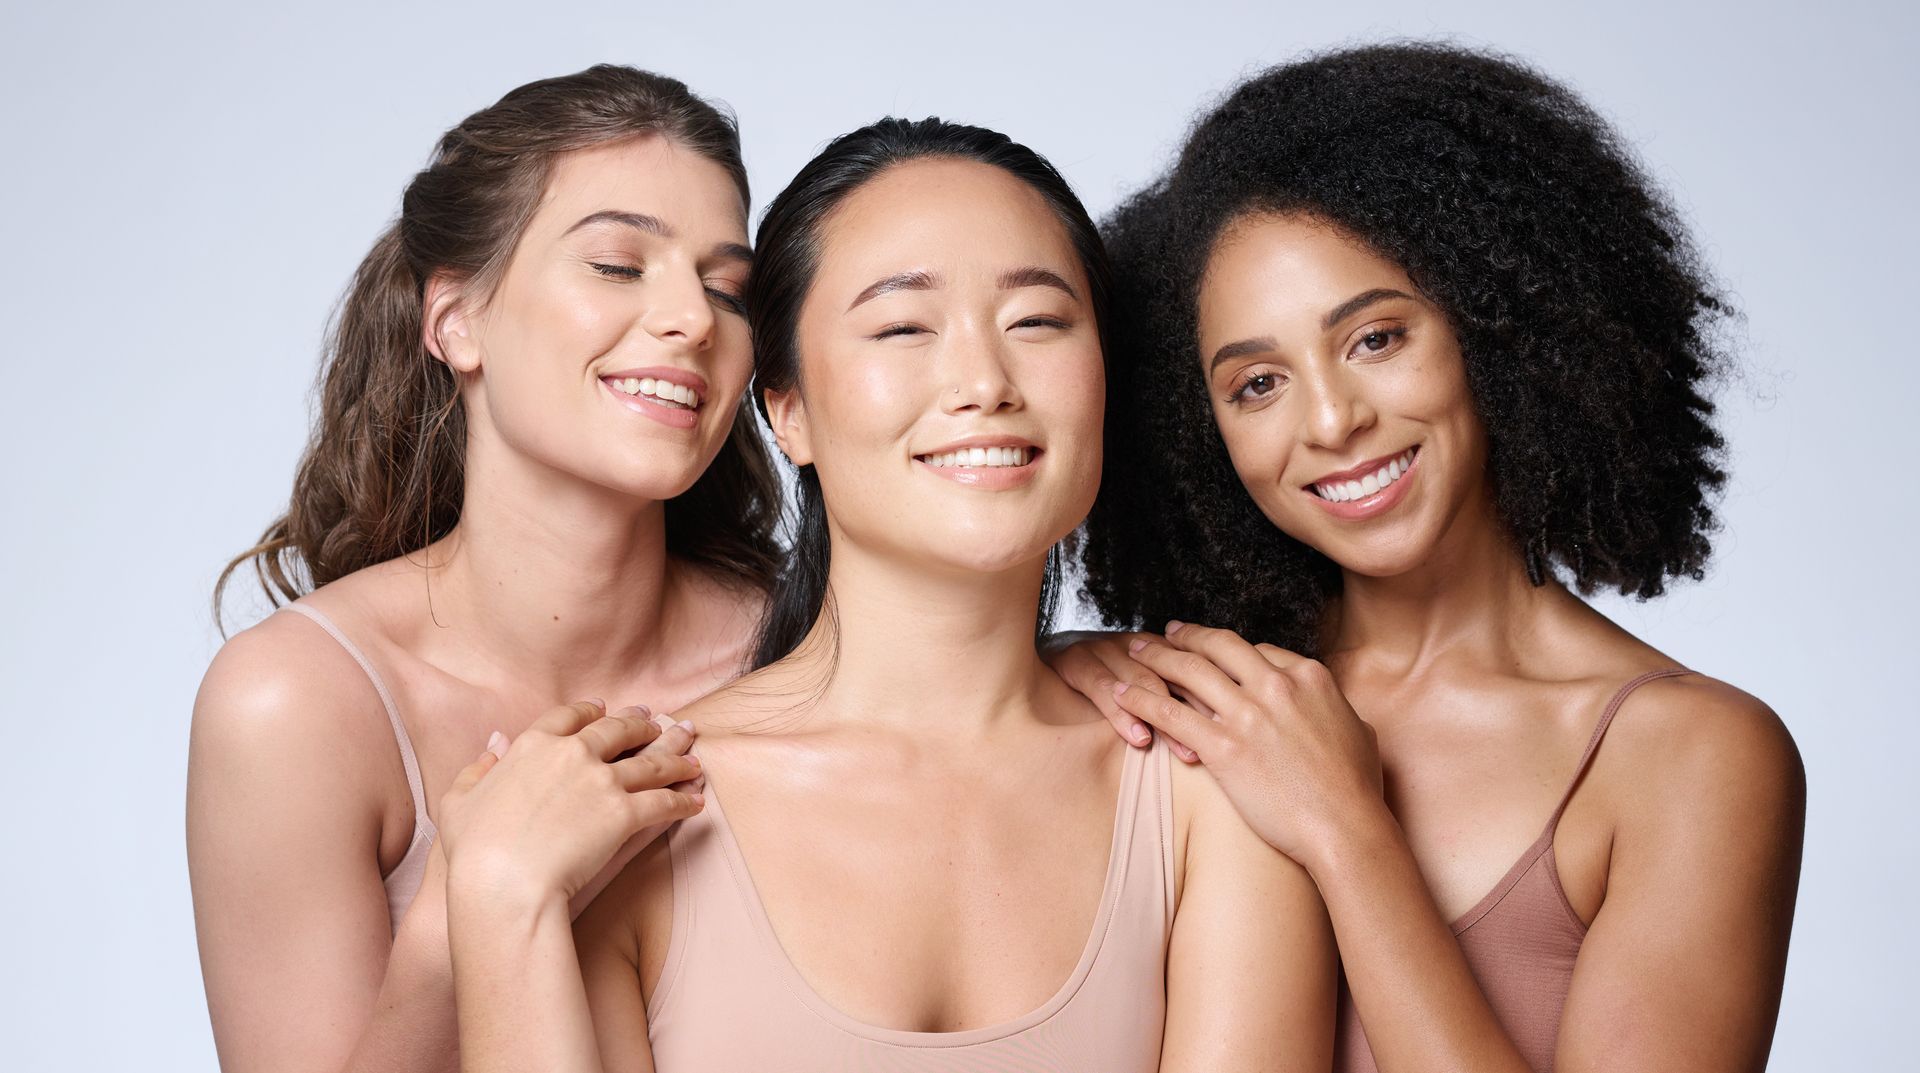 three women are posing for a picture and one has her eyes closed